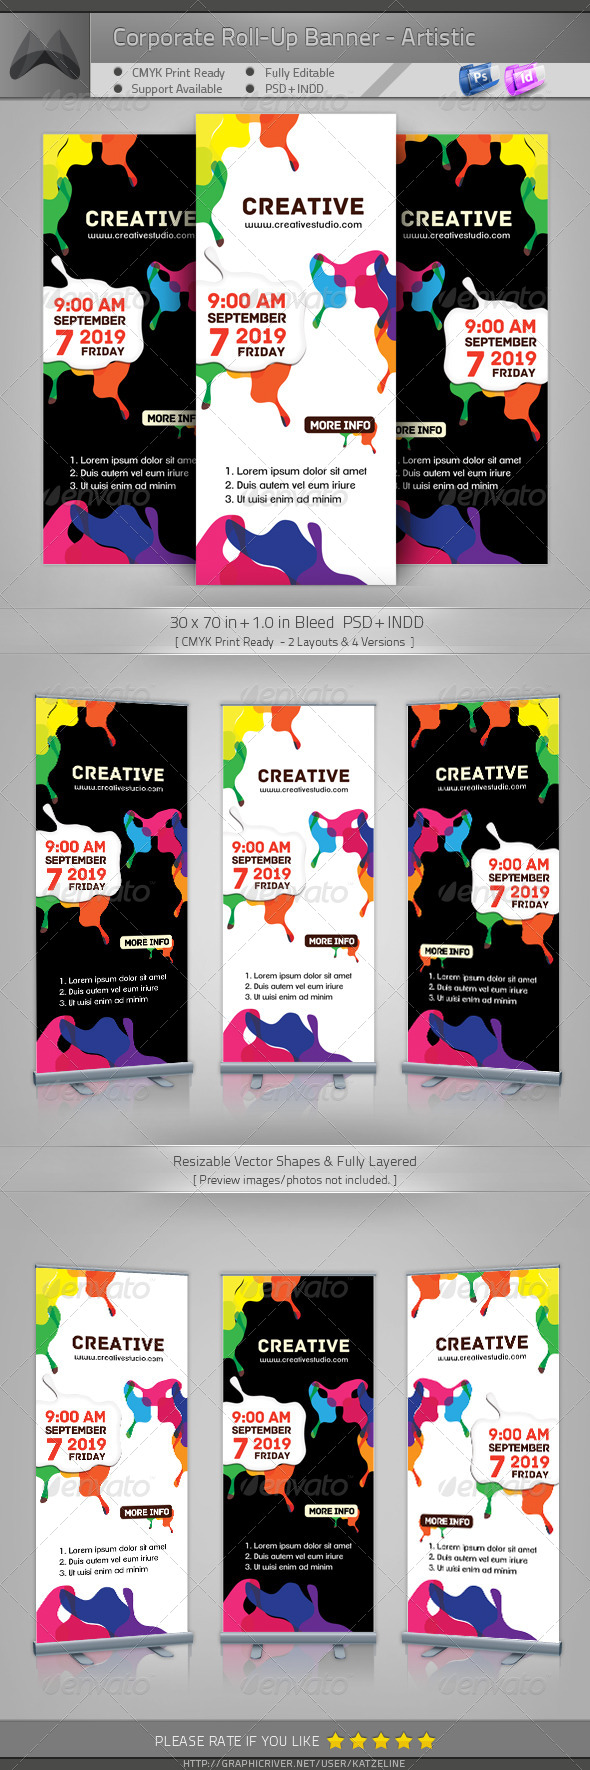 Roll Up Banners Free Template